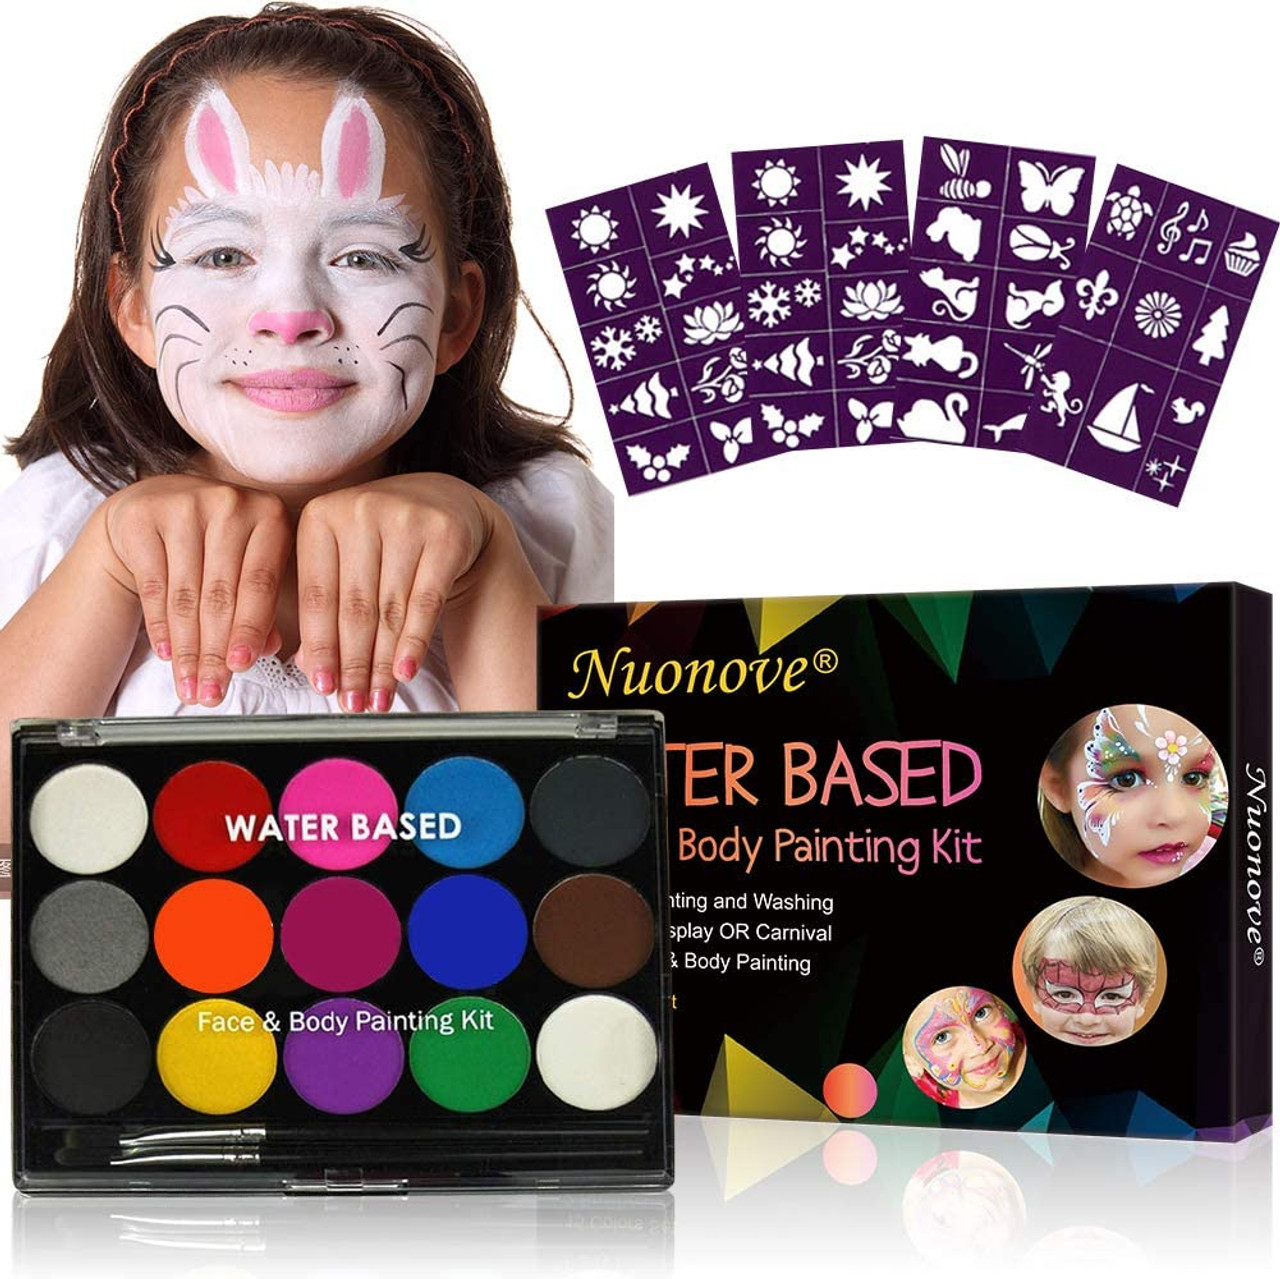 VERONNI 20 Color Professional Face Paint Makeup - Large Pan Black &  White,Non Toxic SFX Makeup,Hypoallergenic Oil Face Painting Kit for Adults  Art